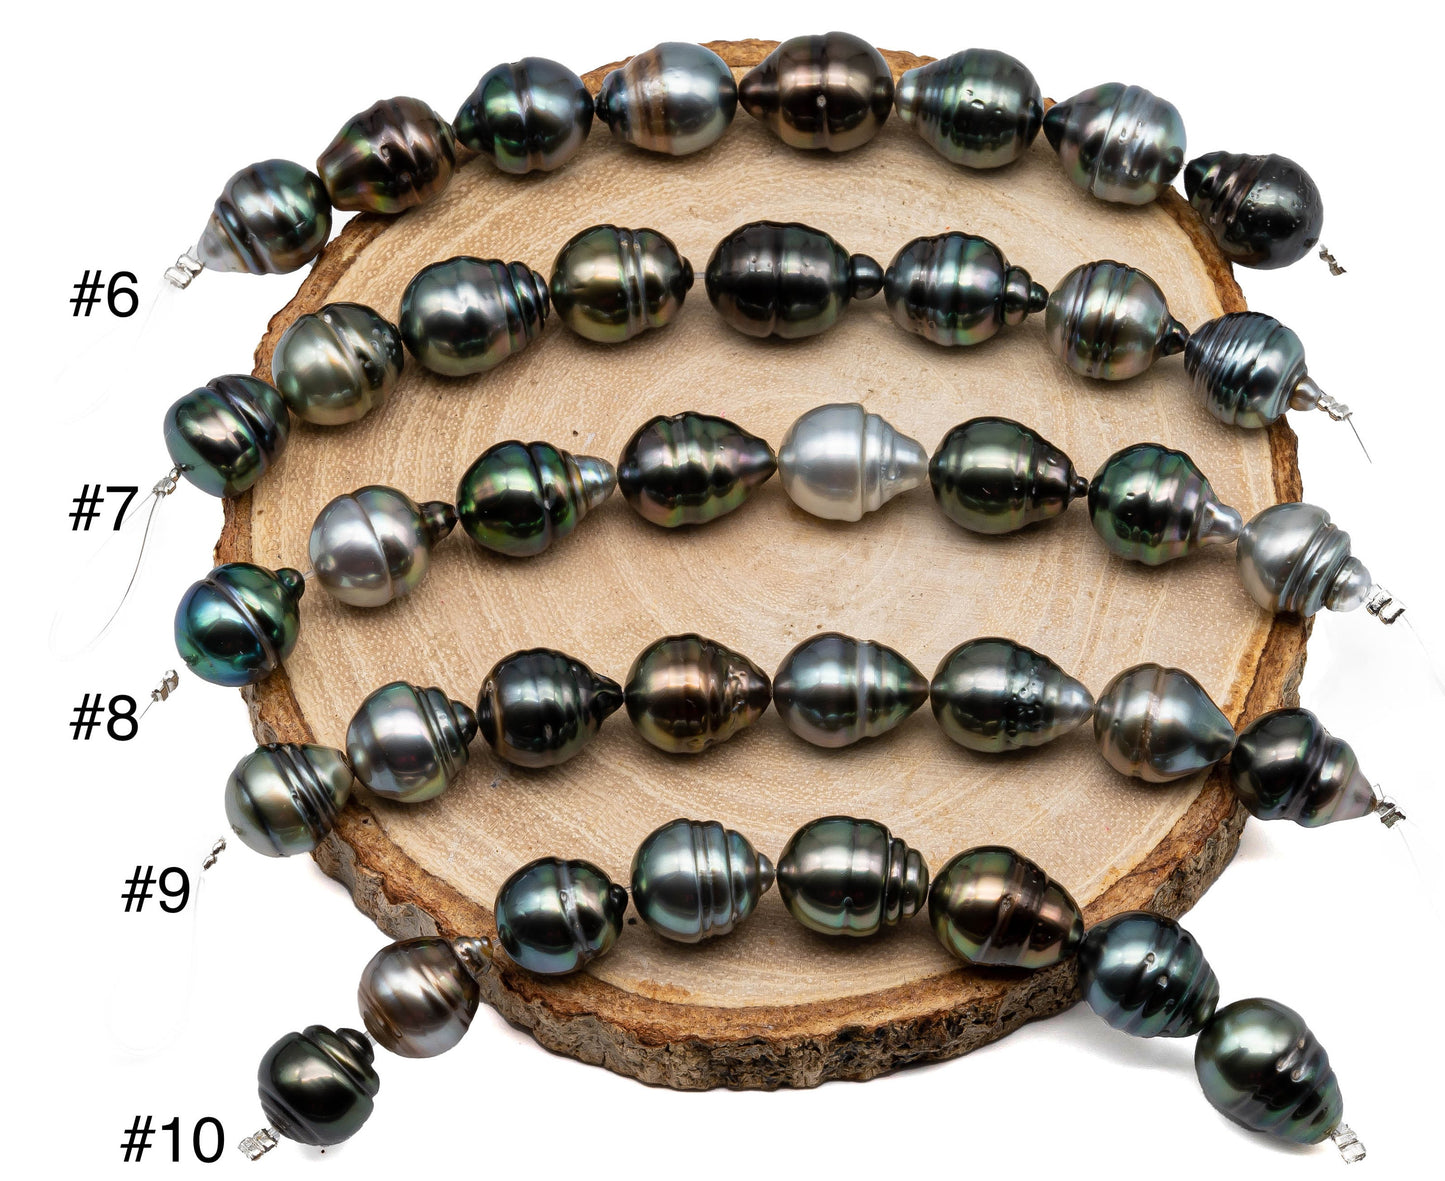 Tahitian Pearls in Multi-color Teardrop Circled with Extremely Nice Luster and Blemishes, 10-11mm in 4 Inches Strand, SKU # 1064TH